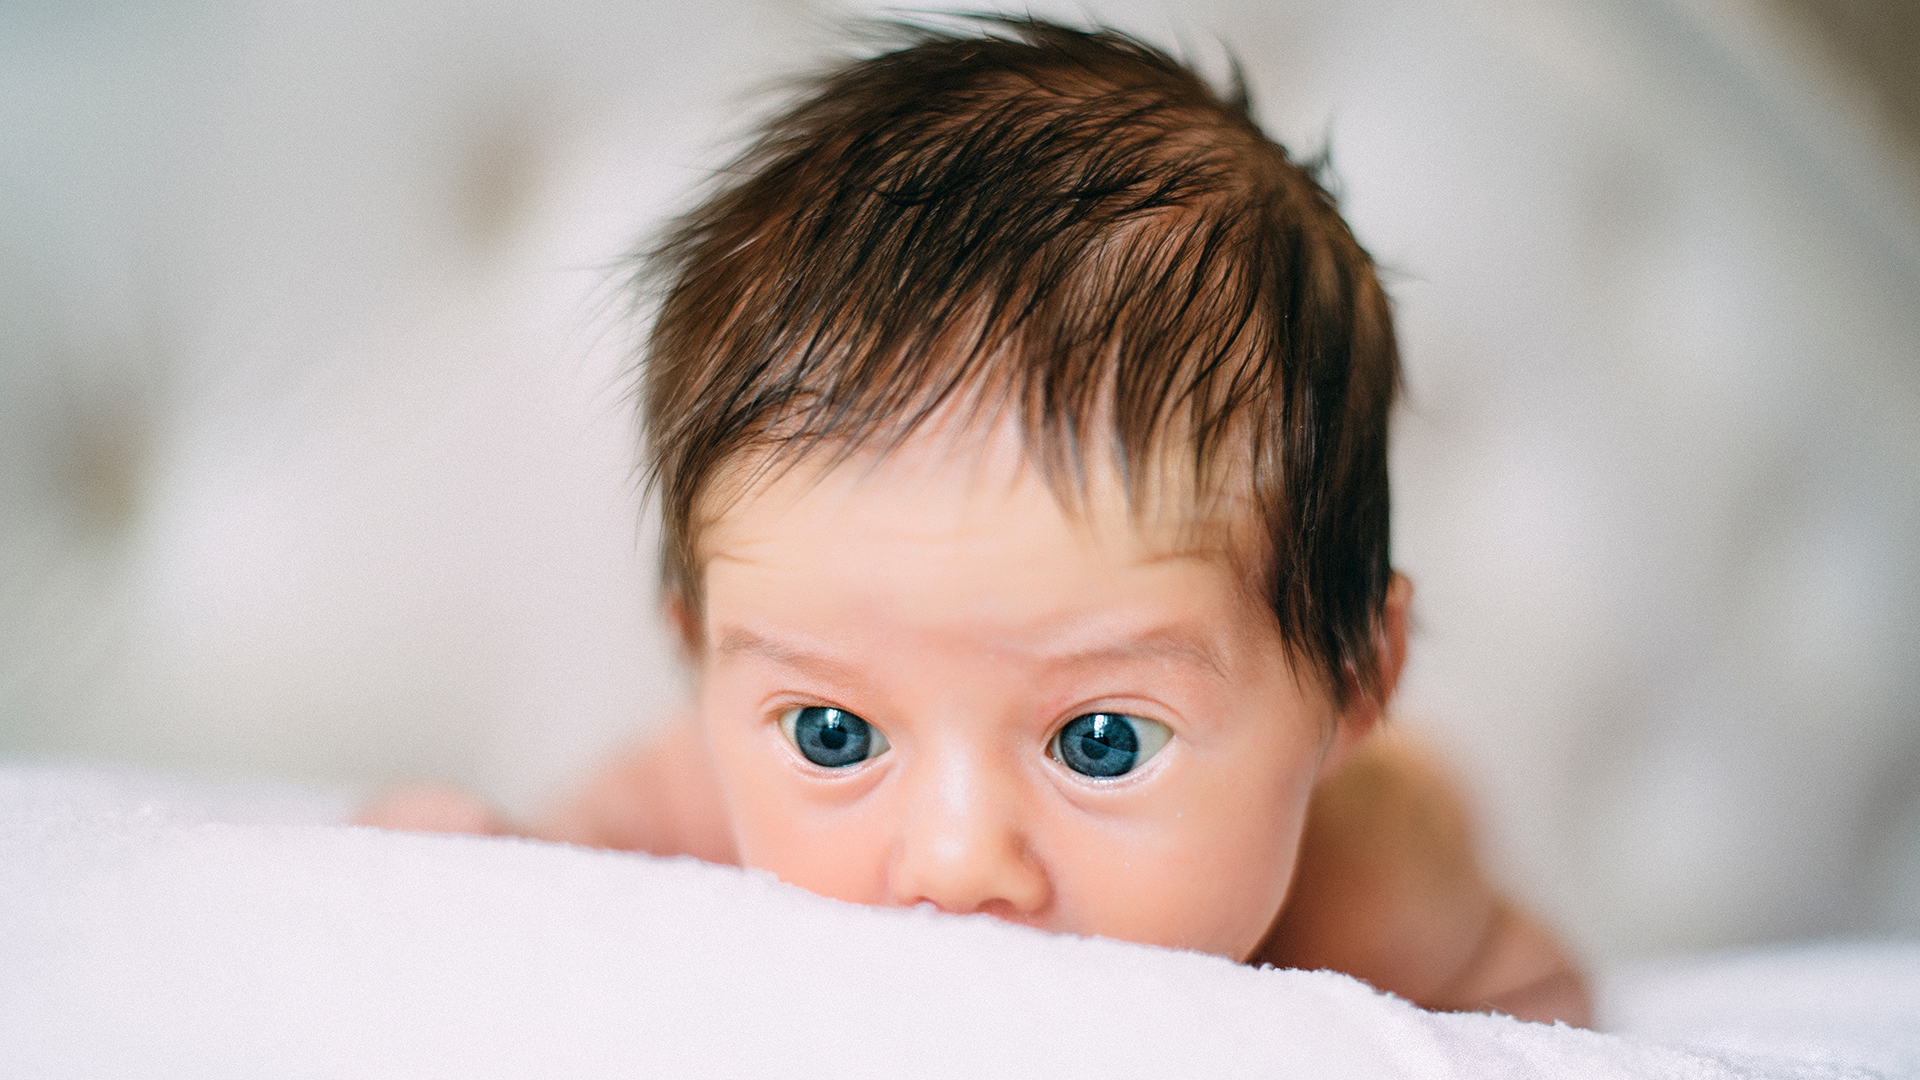 Baby Hair Development: Understanding the Growth and Care of Your Baby’s Hair